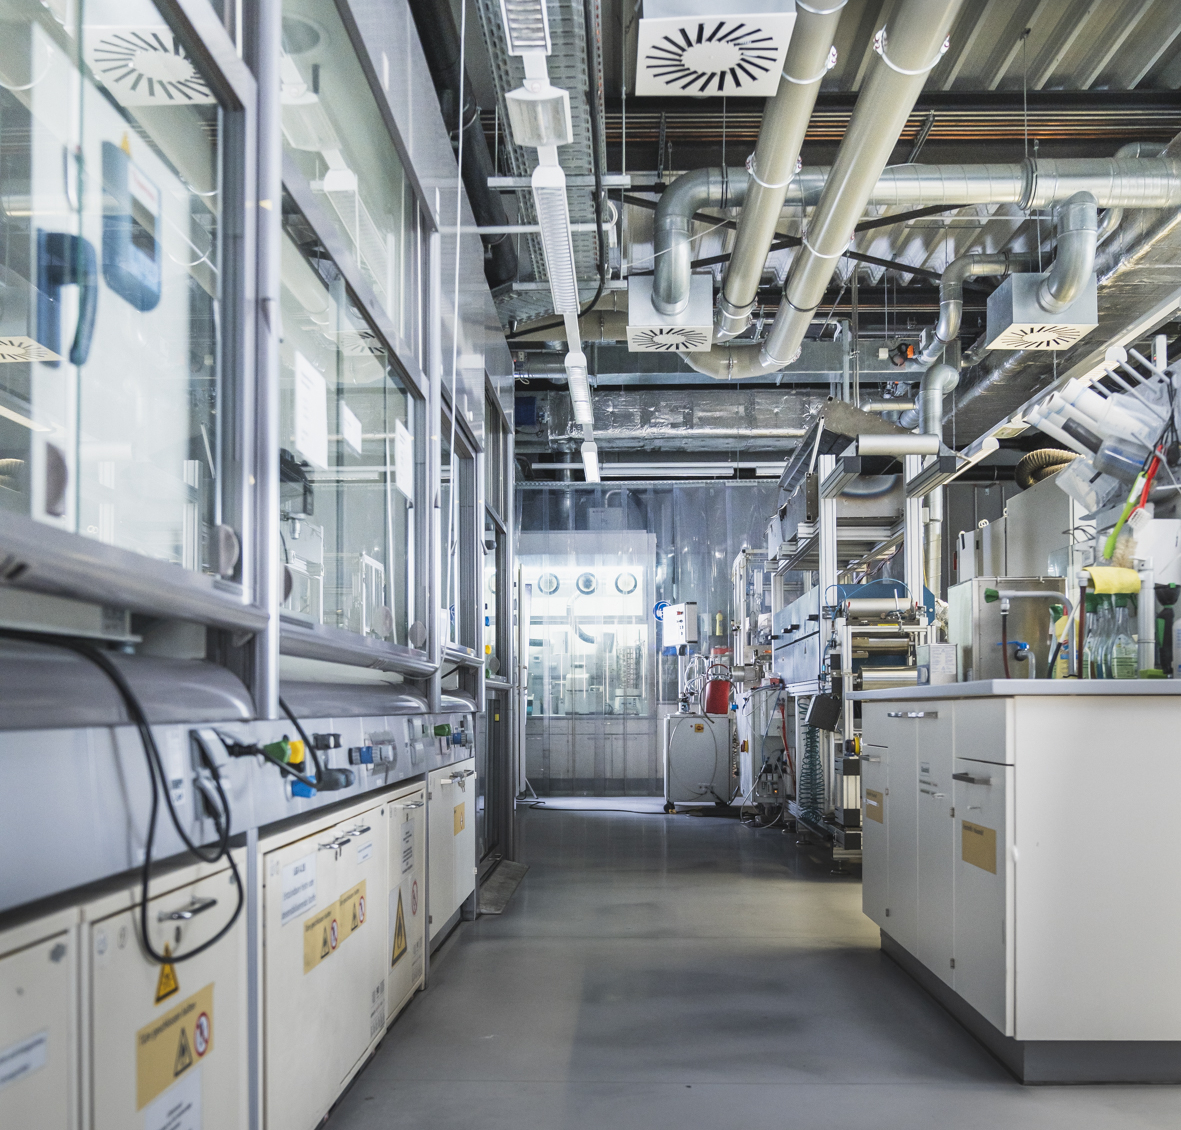 Lab for material preparation and electrode manufacturing at Fraunhofer IWS.